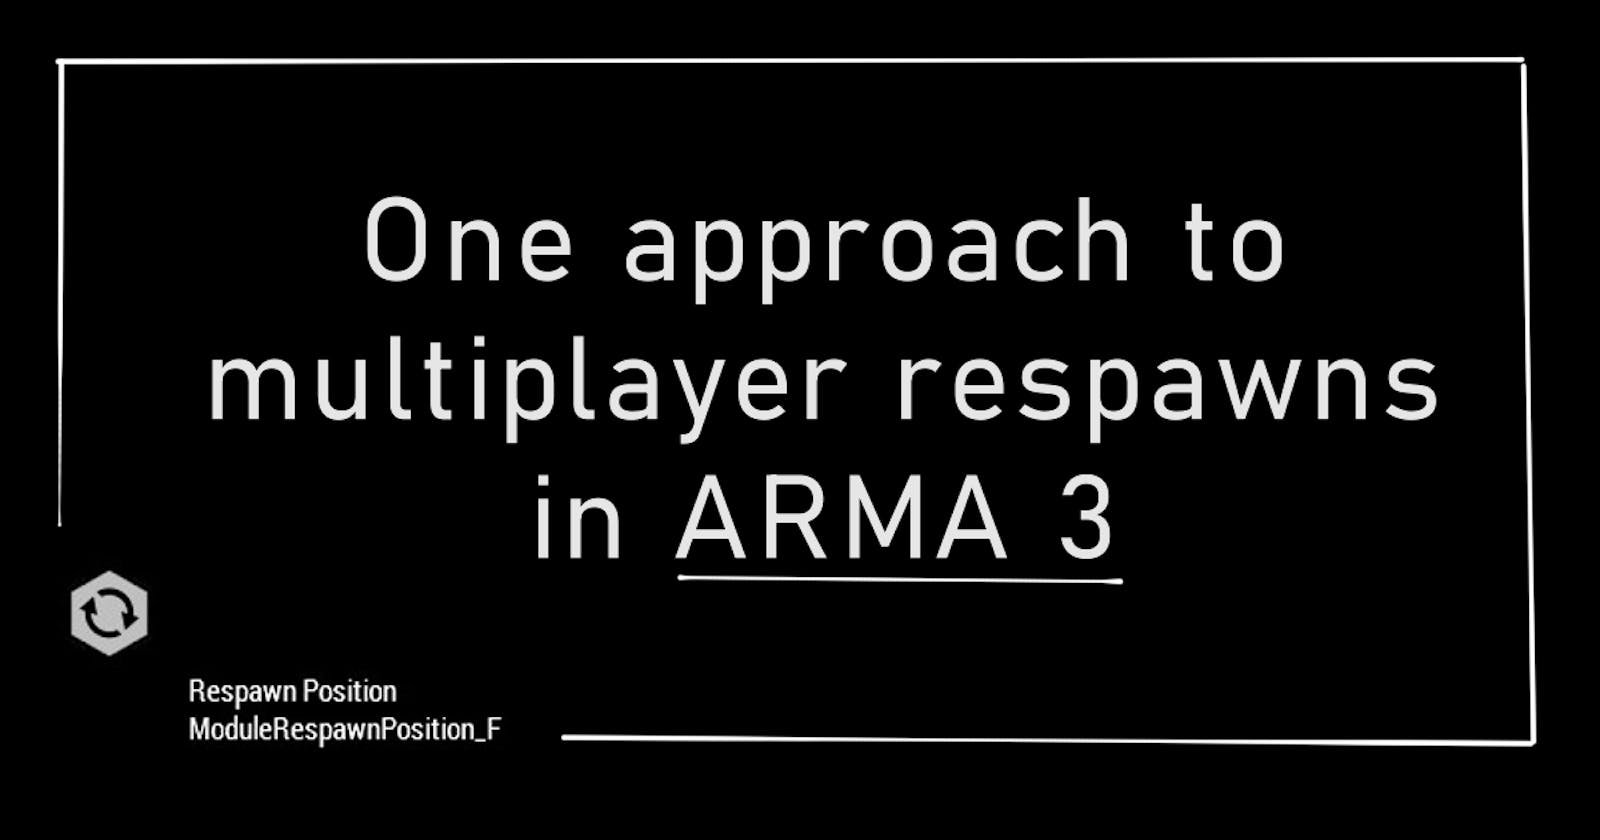 One approach to multiplayer respawns in Arma 3